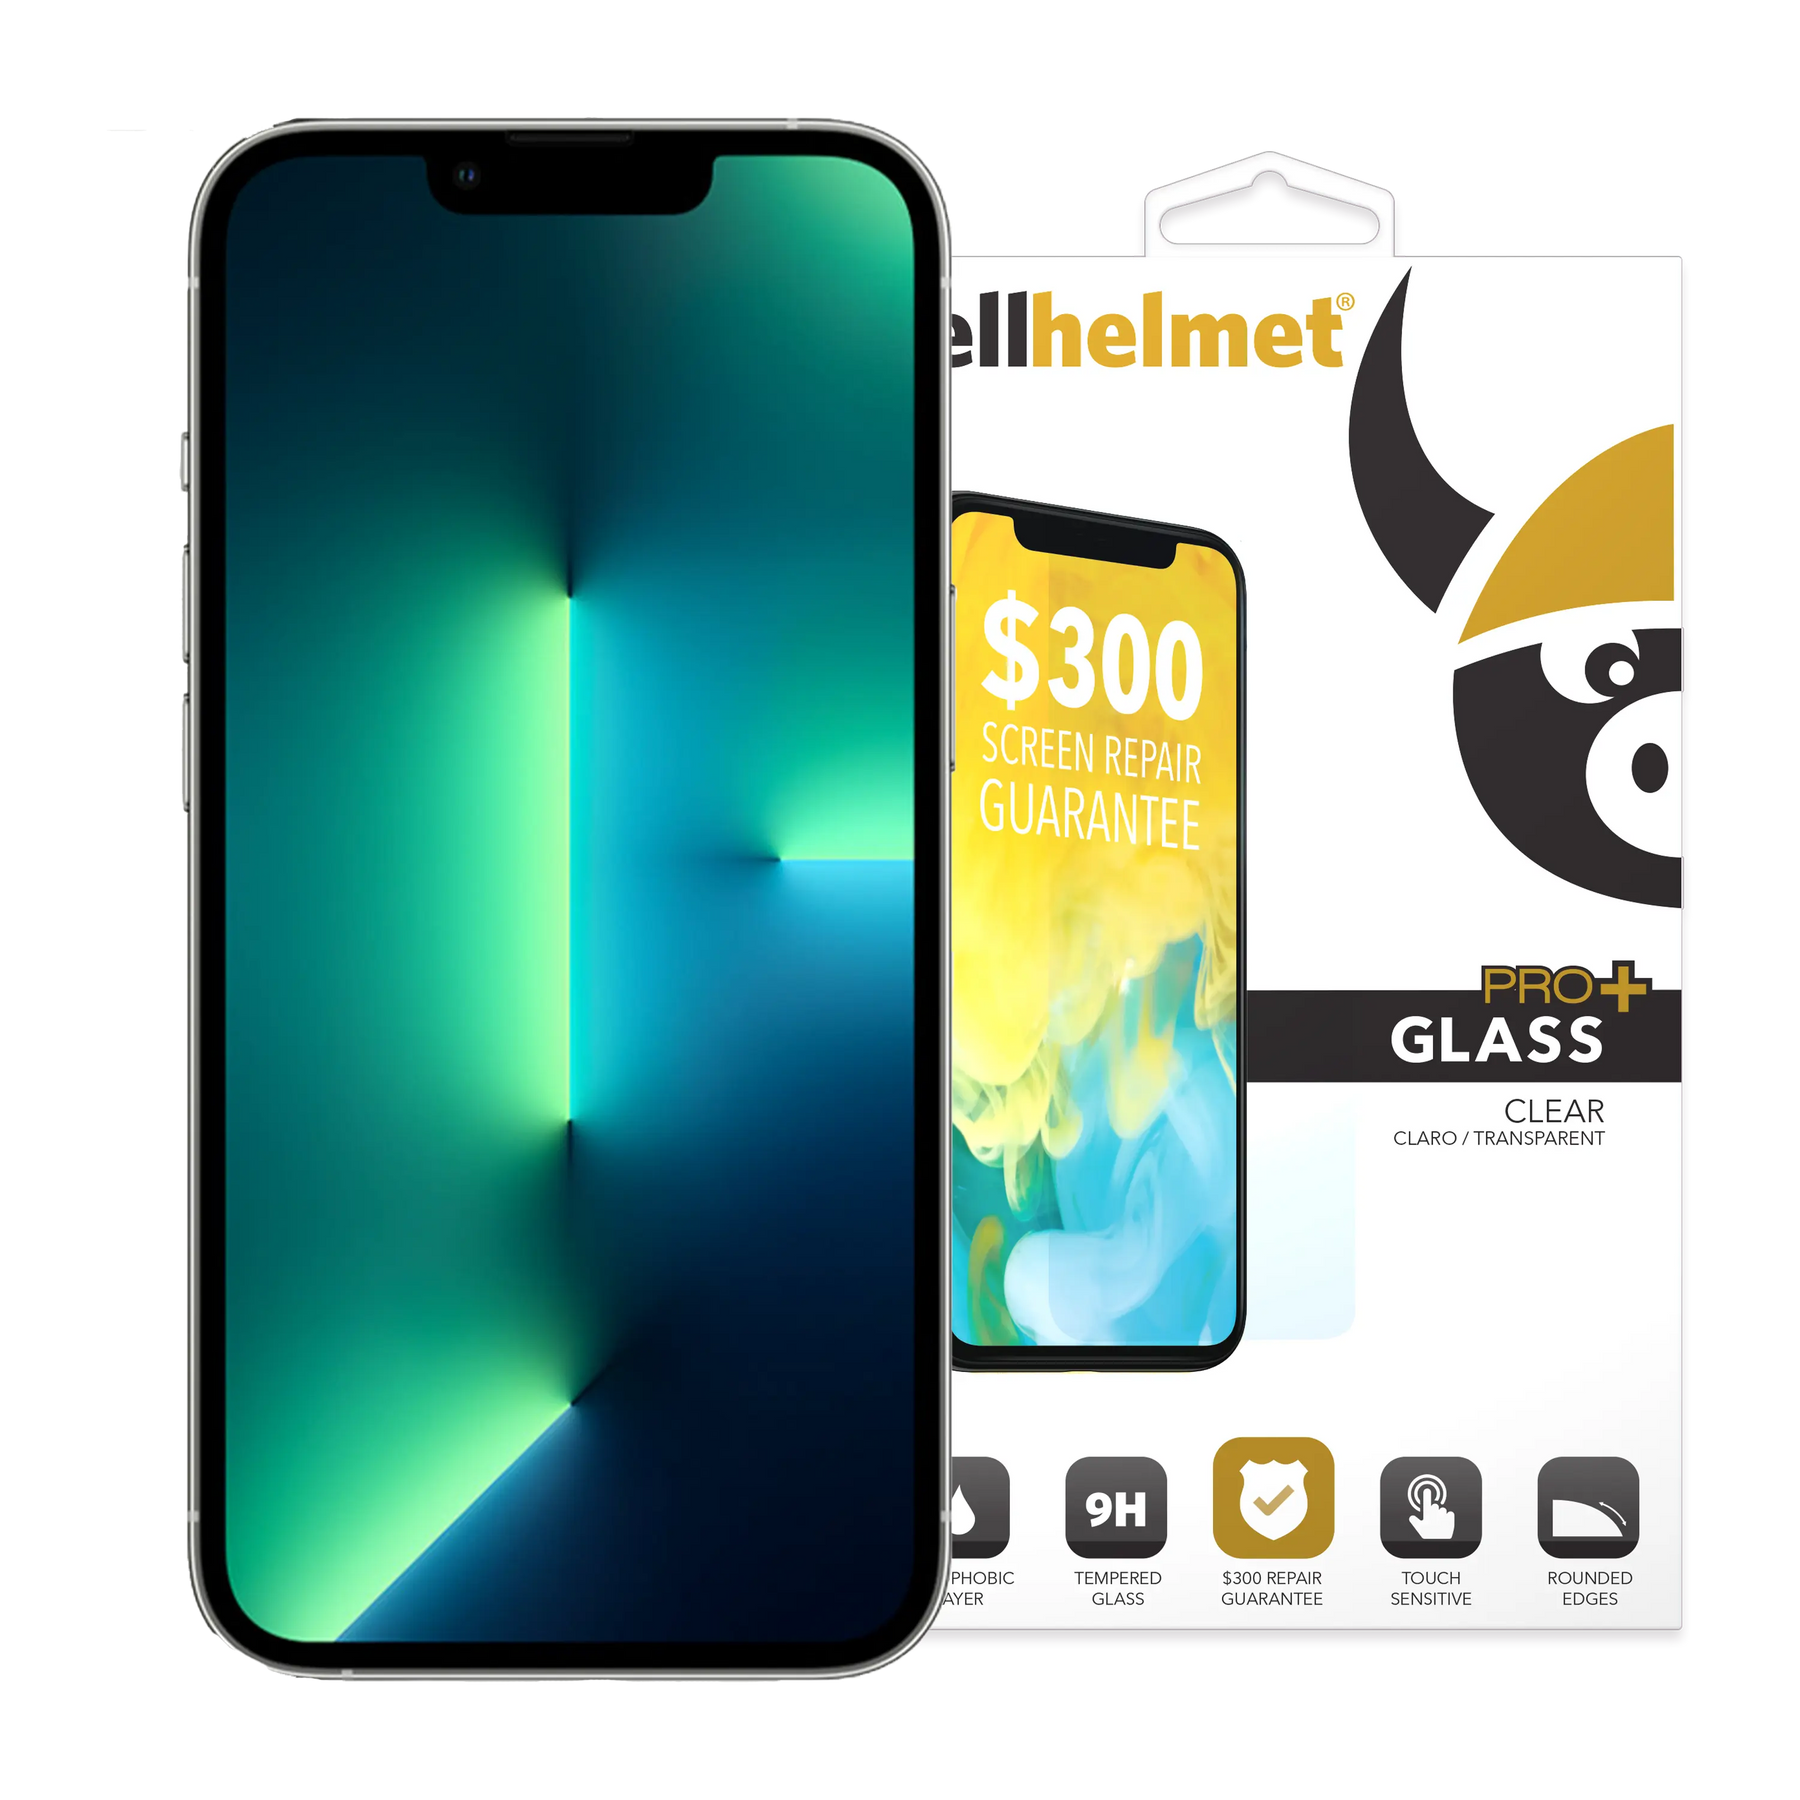 cellhelmet Tempered Glass for iPhone 13 Pro Max with Insurance